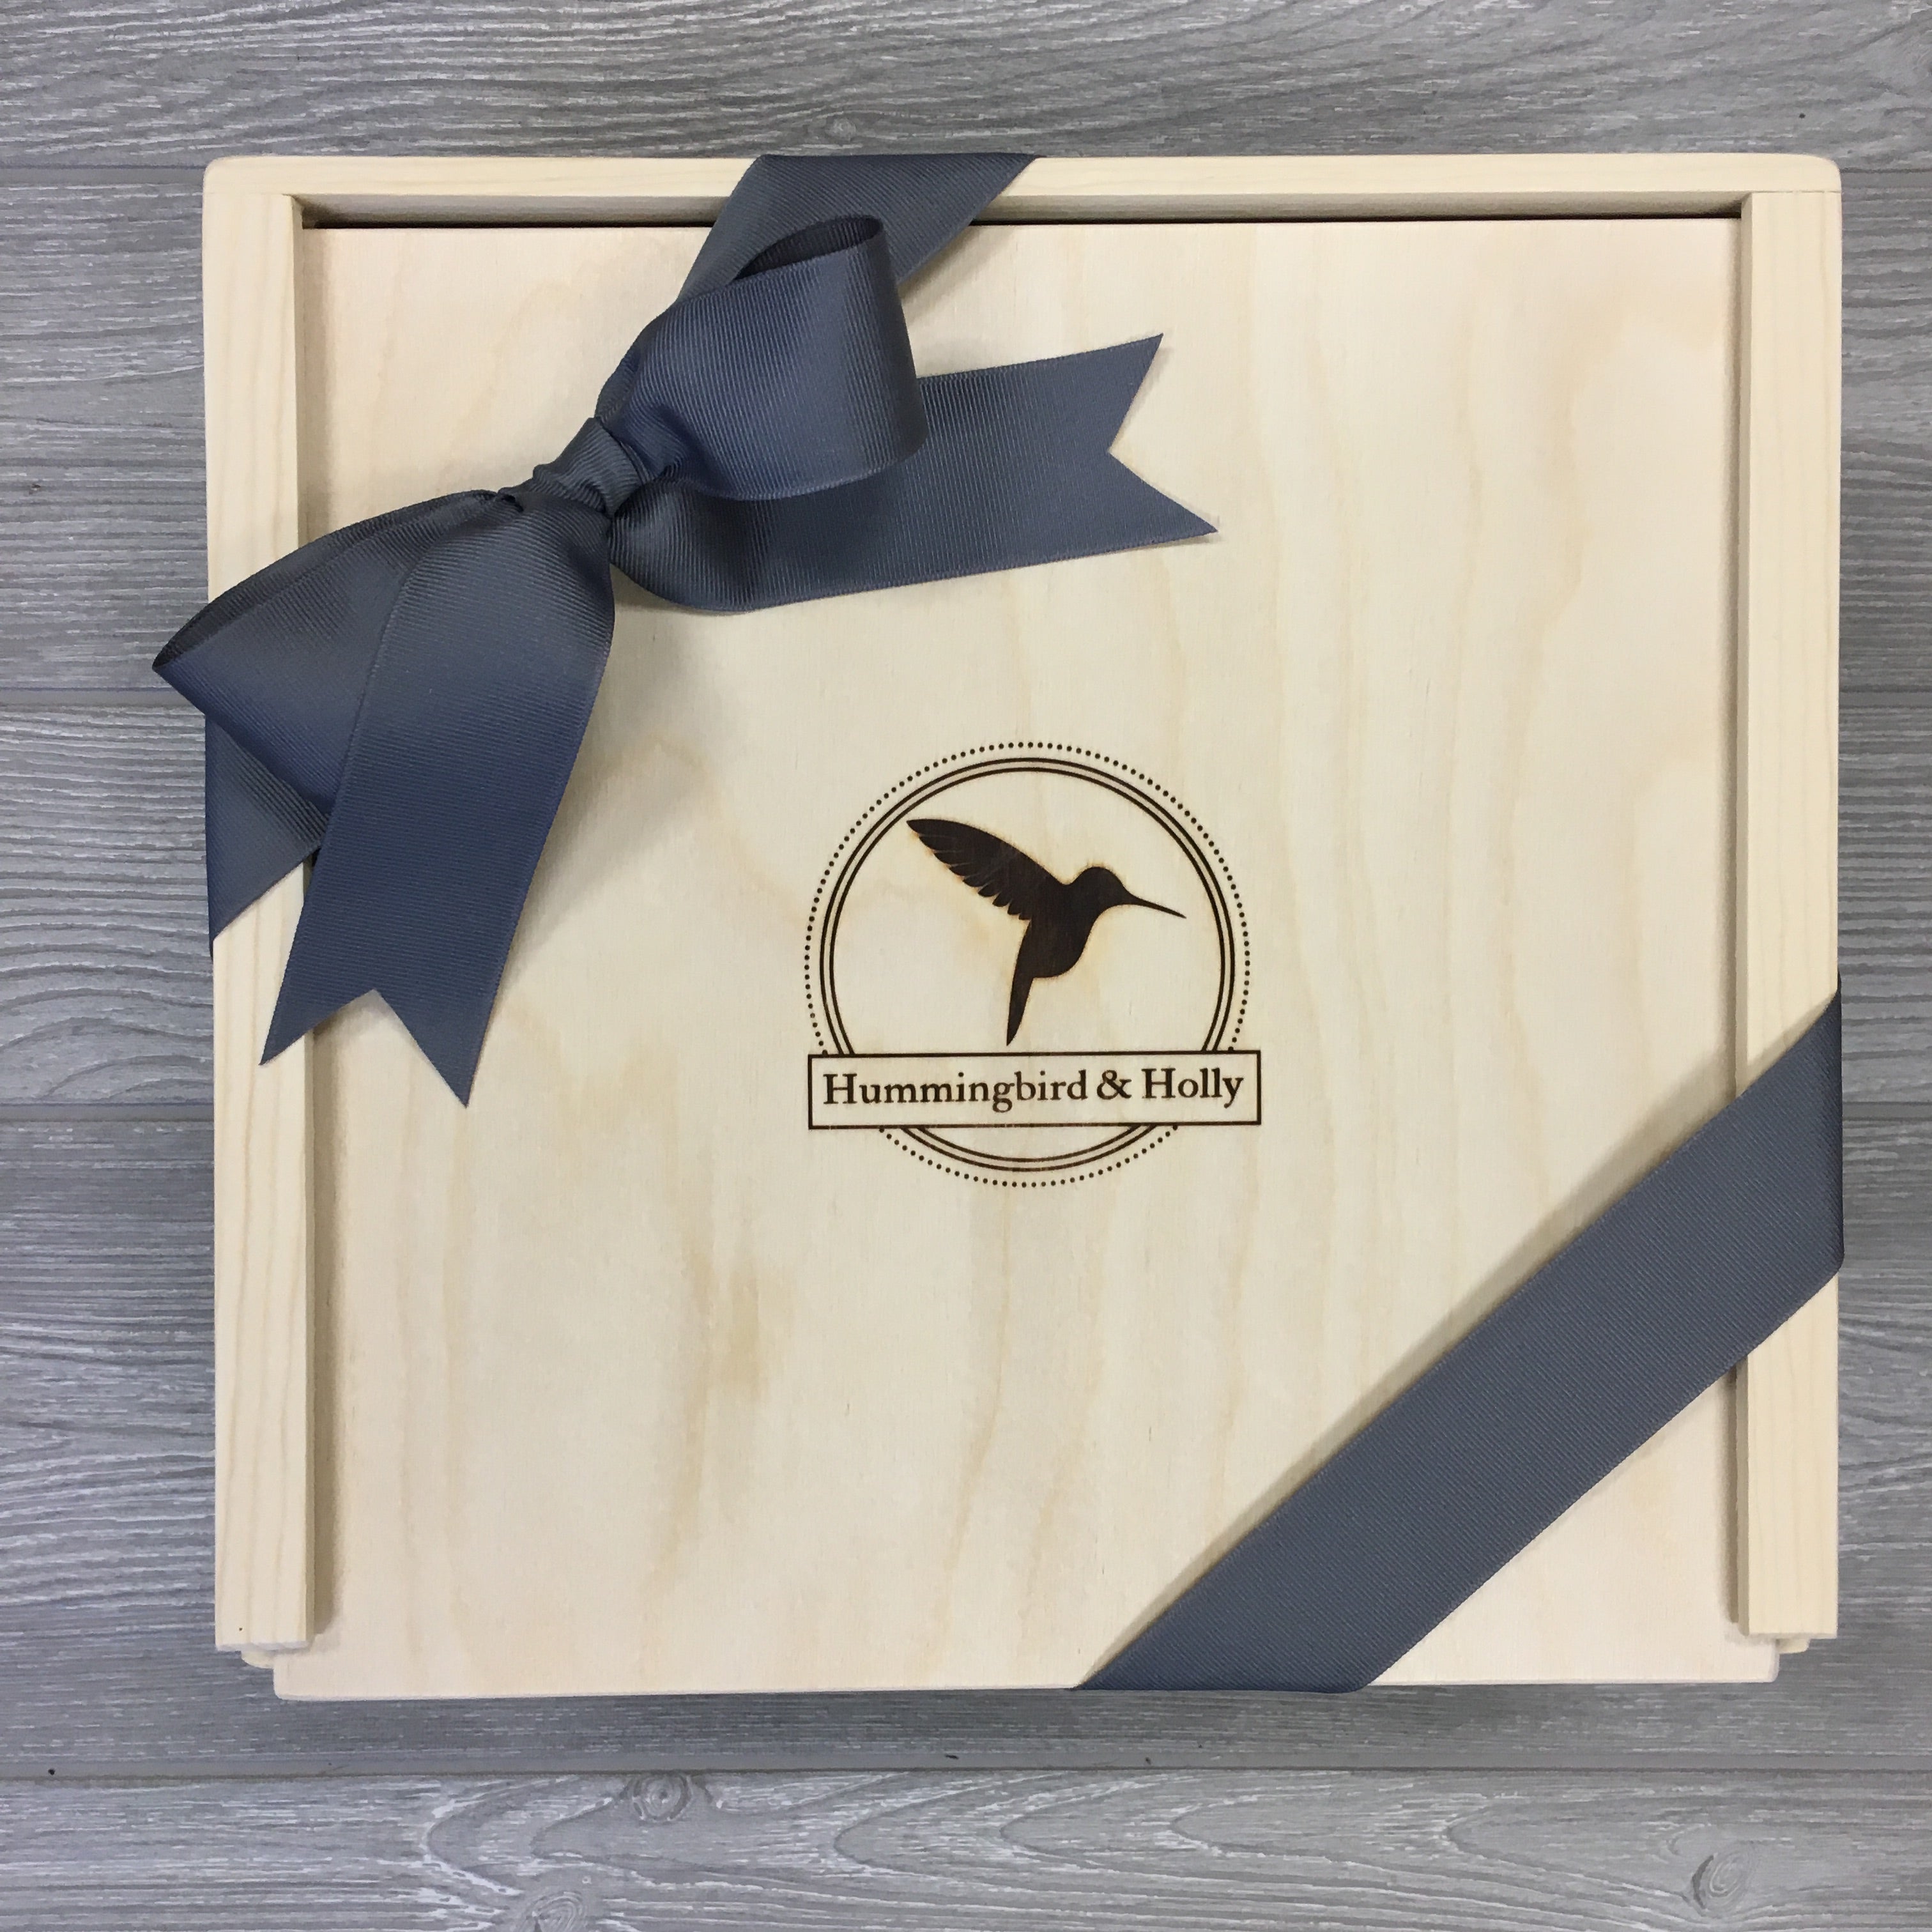 closeup of the wooden gift box with a Hummingbird and Holly logo included in the housewarming gift basket.